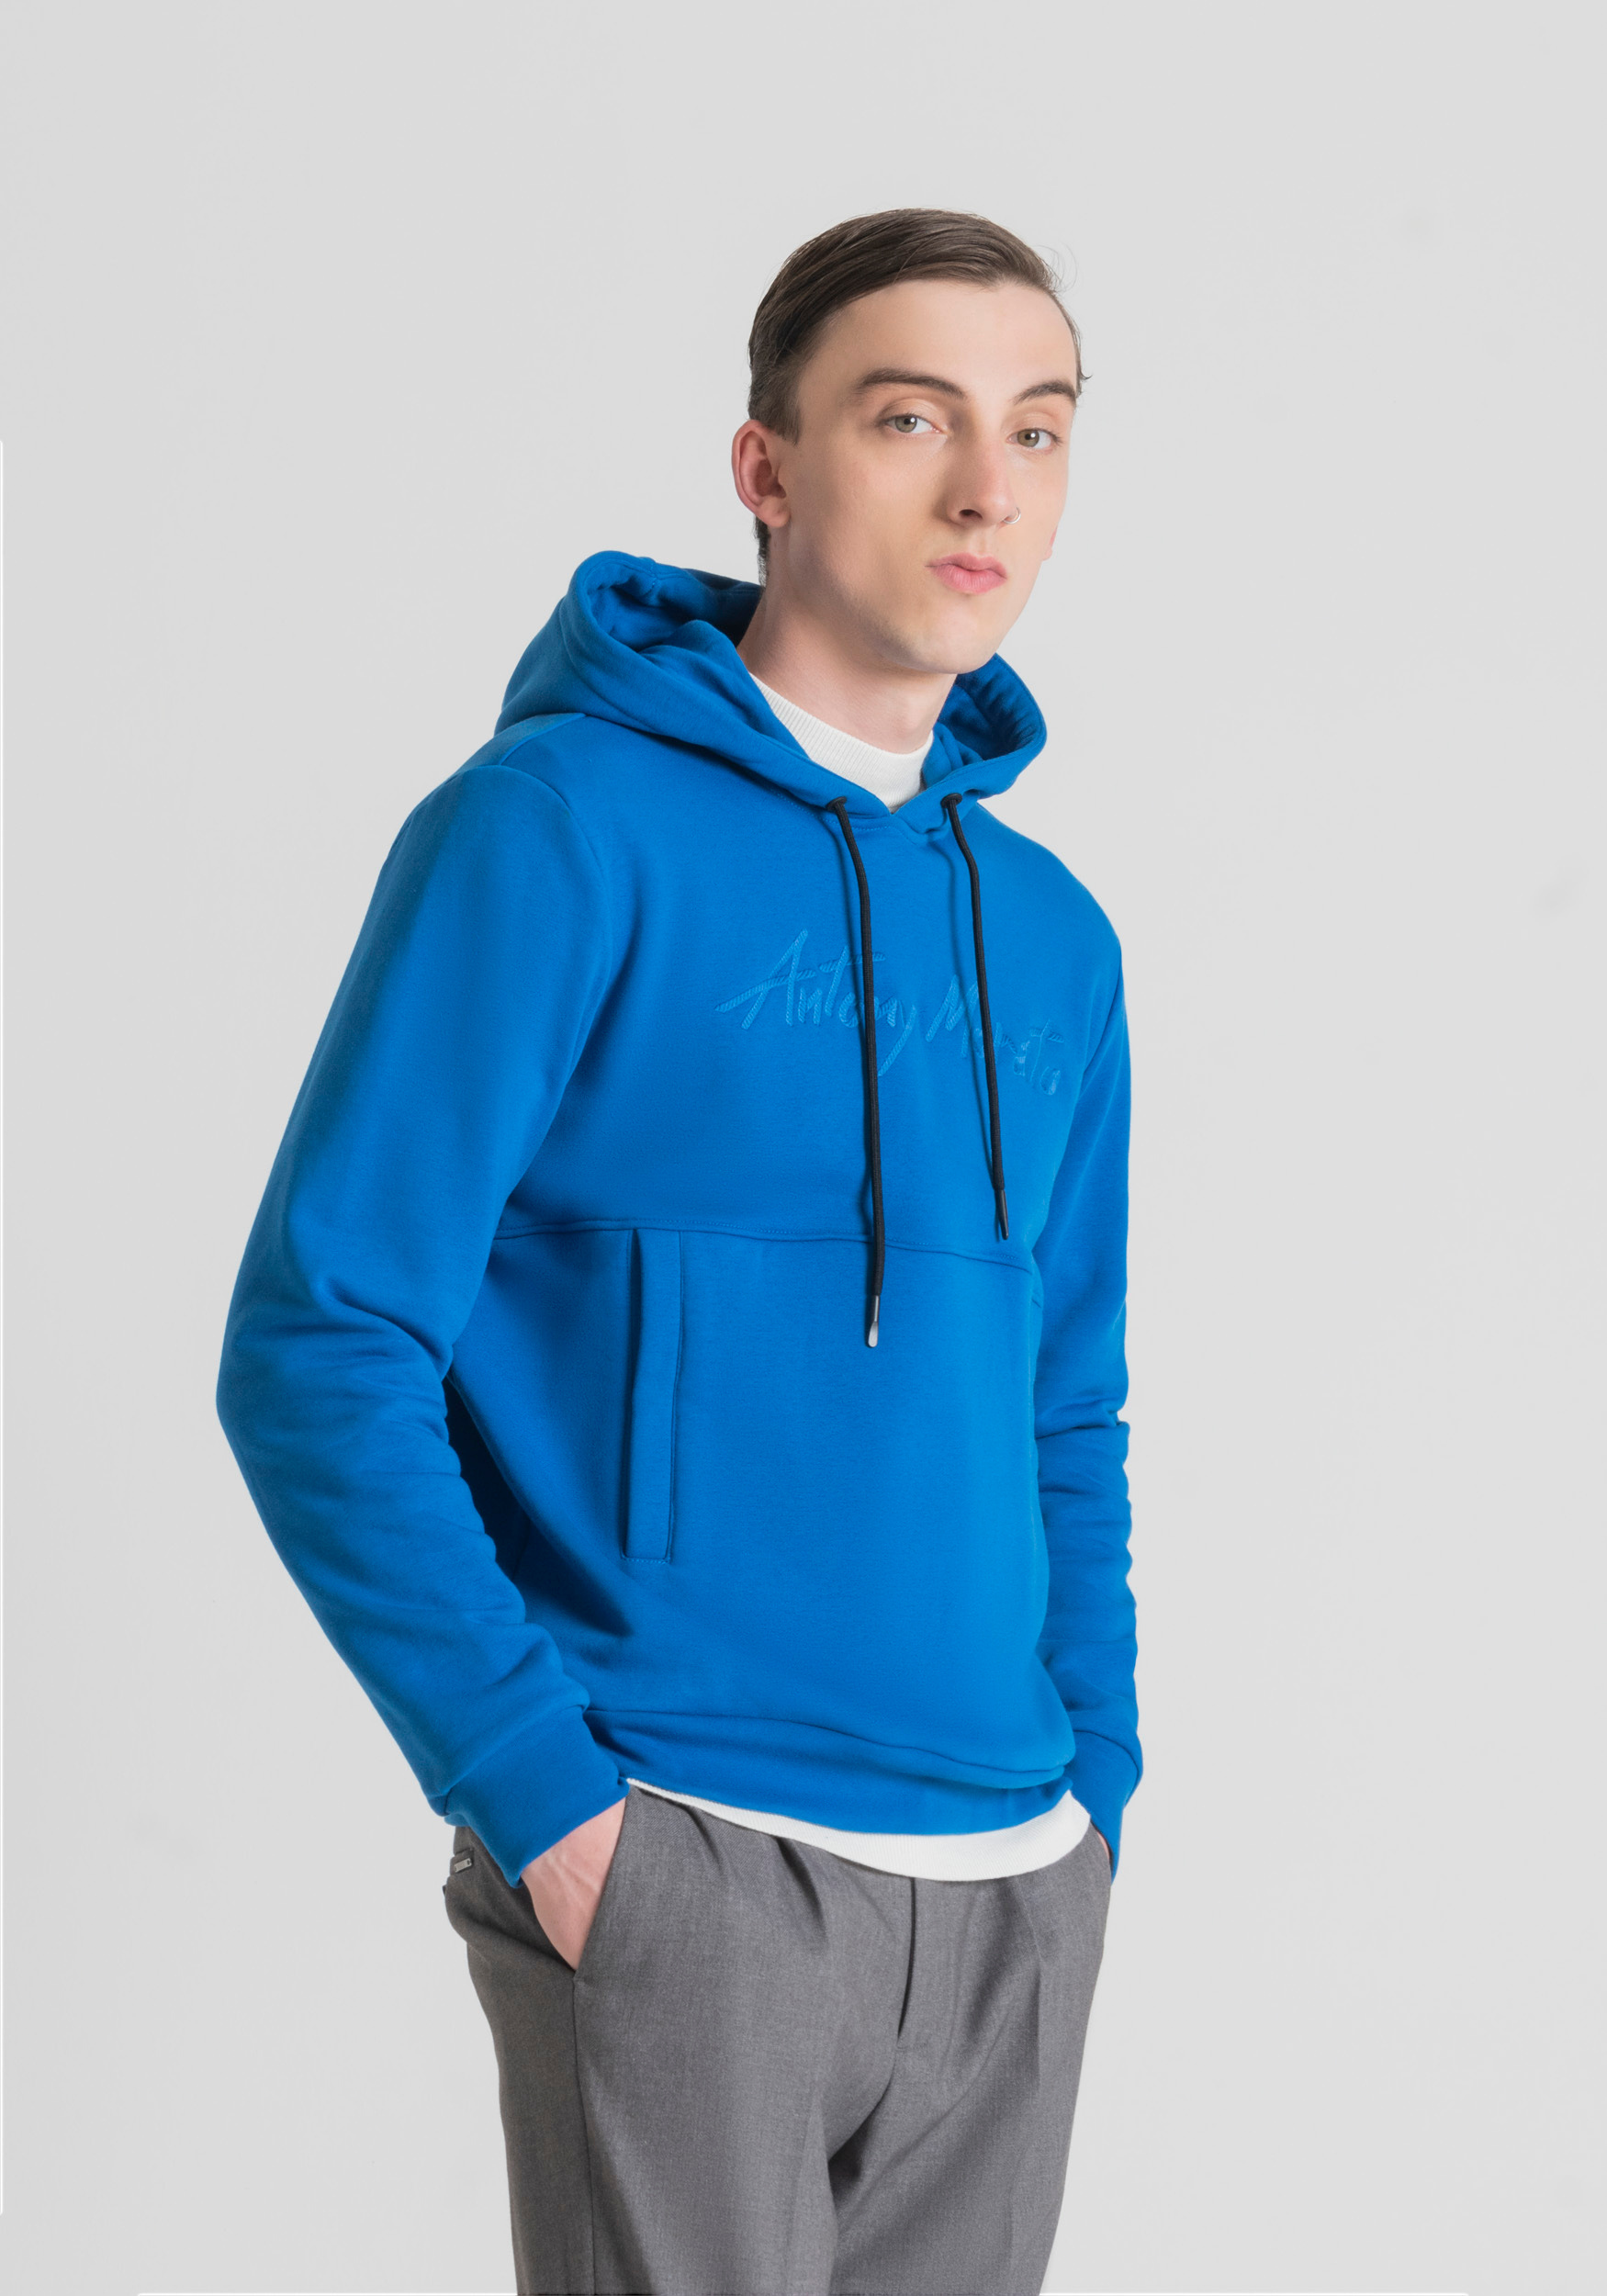 REGULAR-FIT SWEATSHIRT IN STRETCH COTTON-BLEND WITH EMBROIDERED LOGO ...